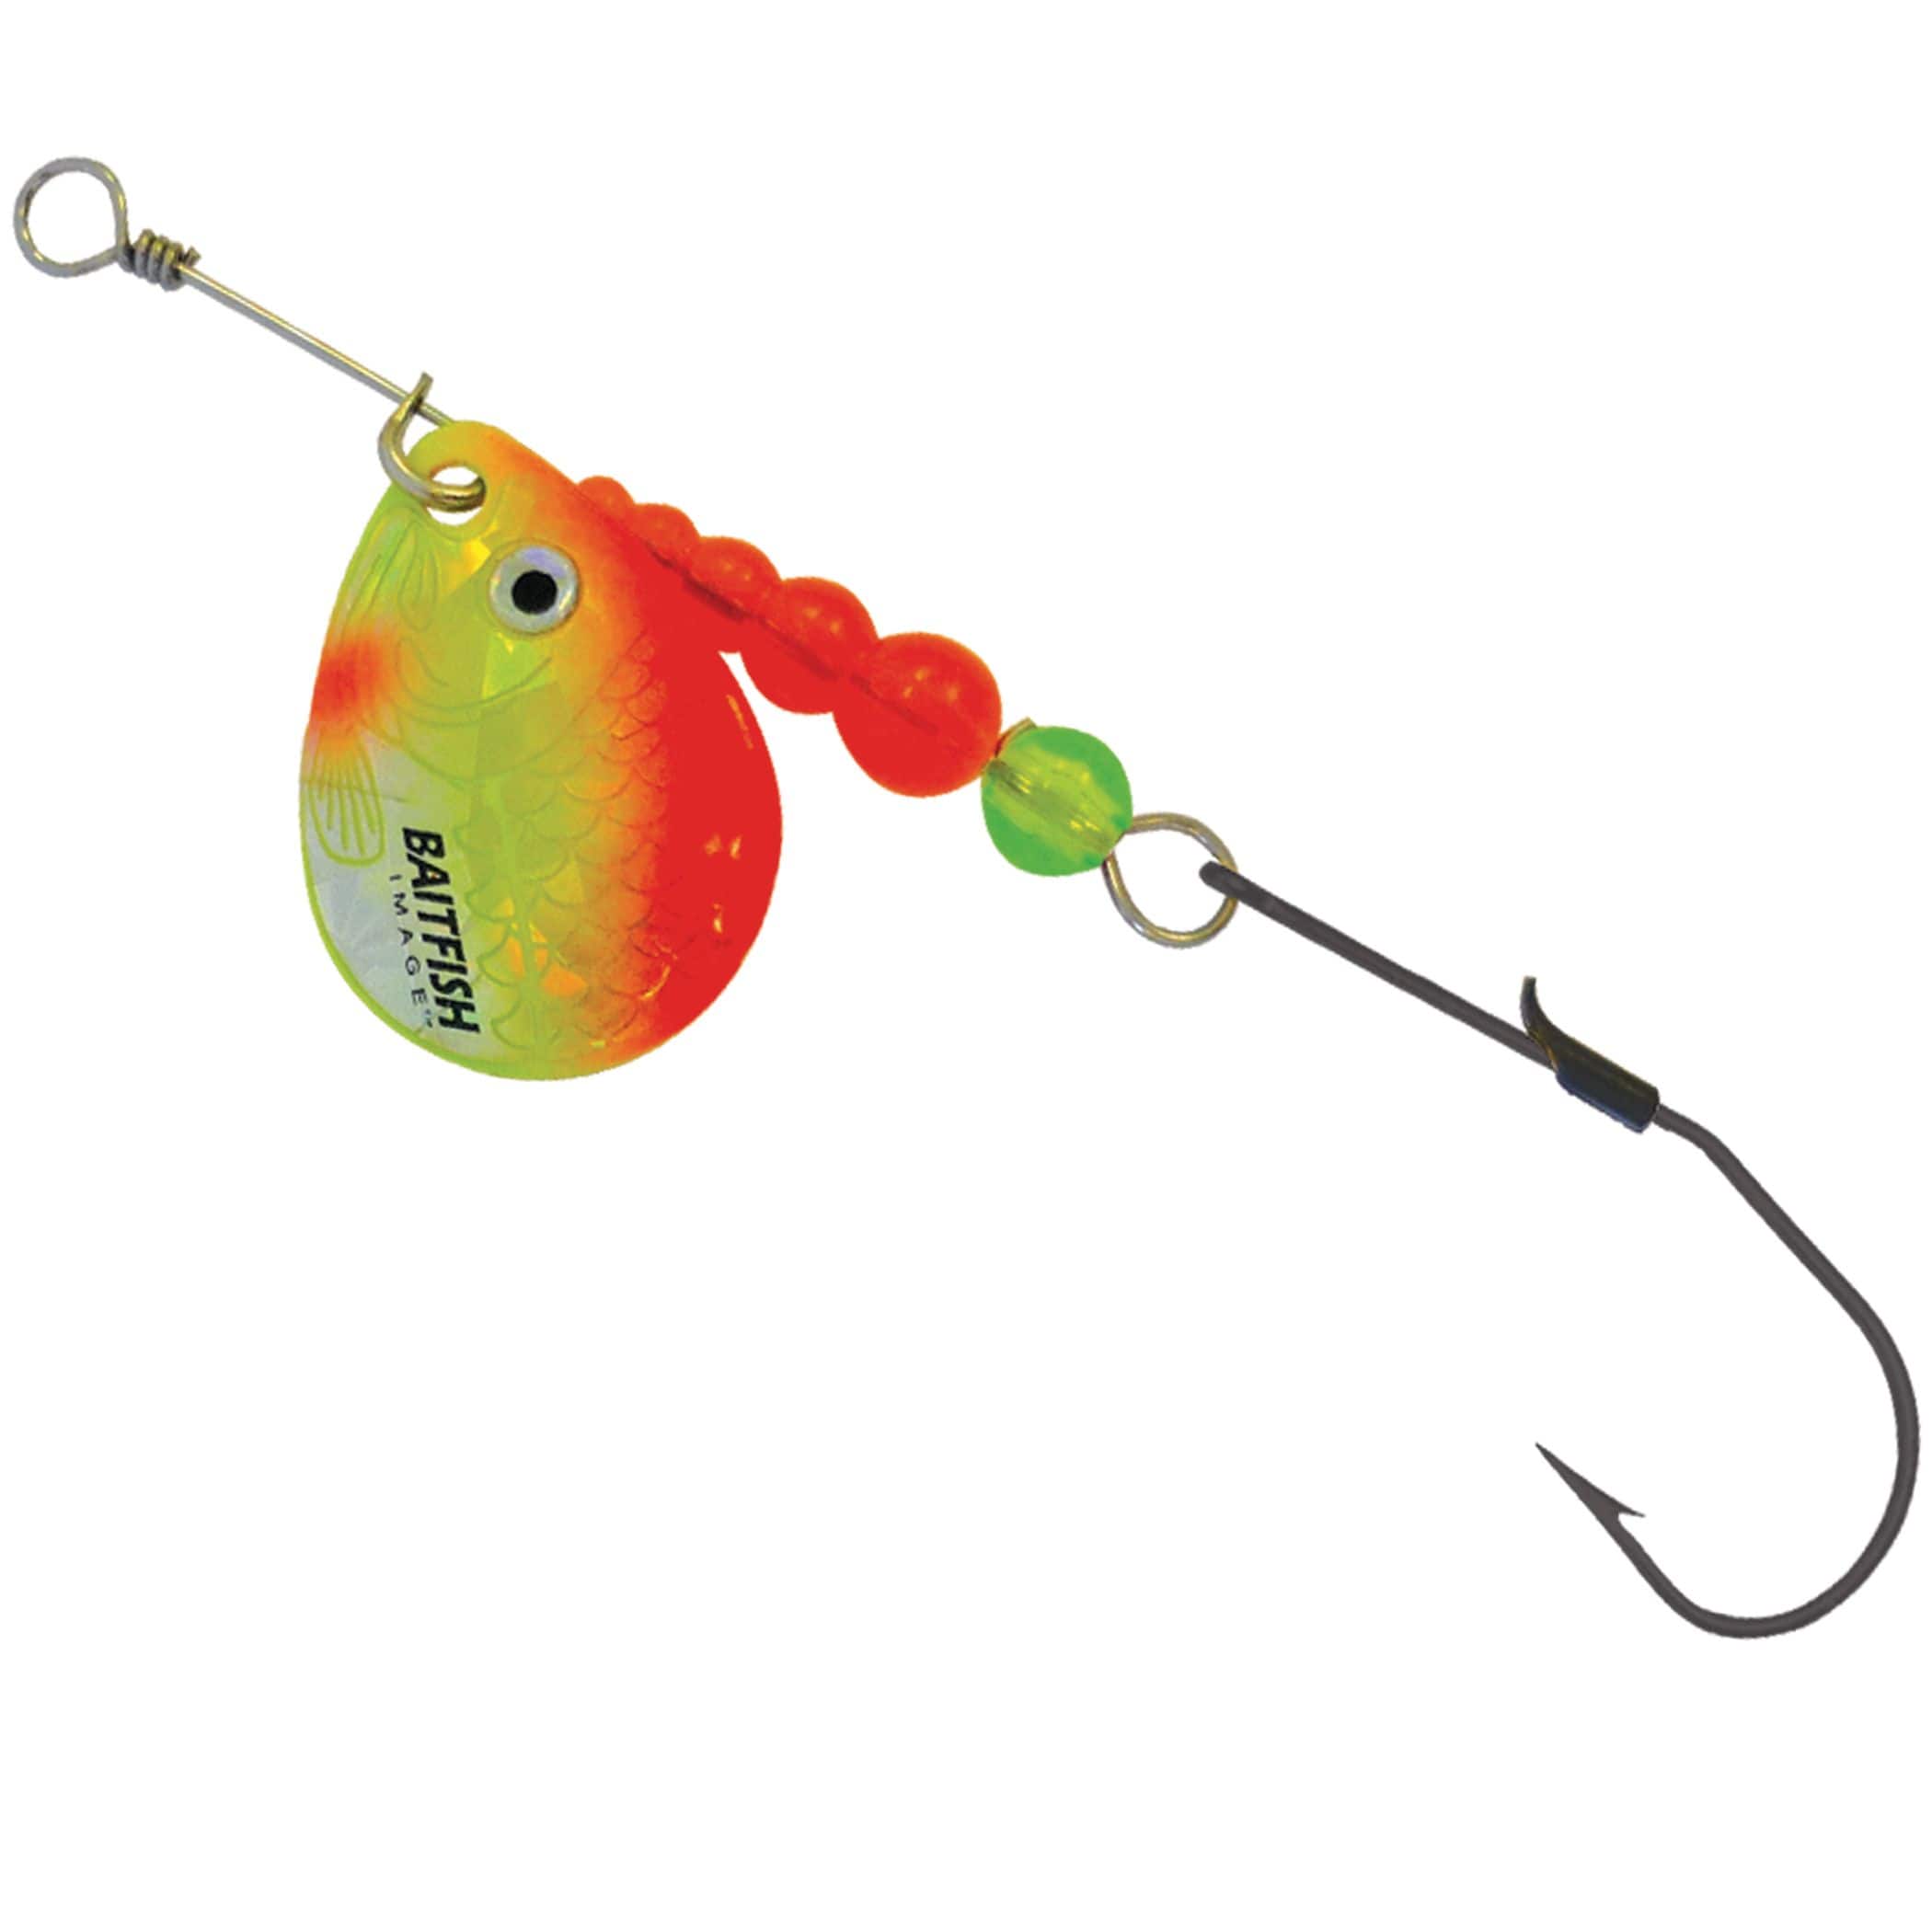 https://media-www.canadiantire.ca/product/playing/fishing/fishing-lures/0776846/northland-tackle-pro-float-n-spin-uv-fire-perch-4-b4fbfe3d-279d-40aa-bfb9-02e1a319cee8-jpgrendition.jpg